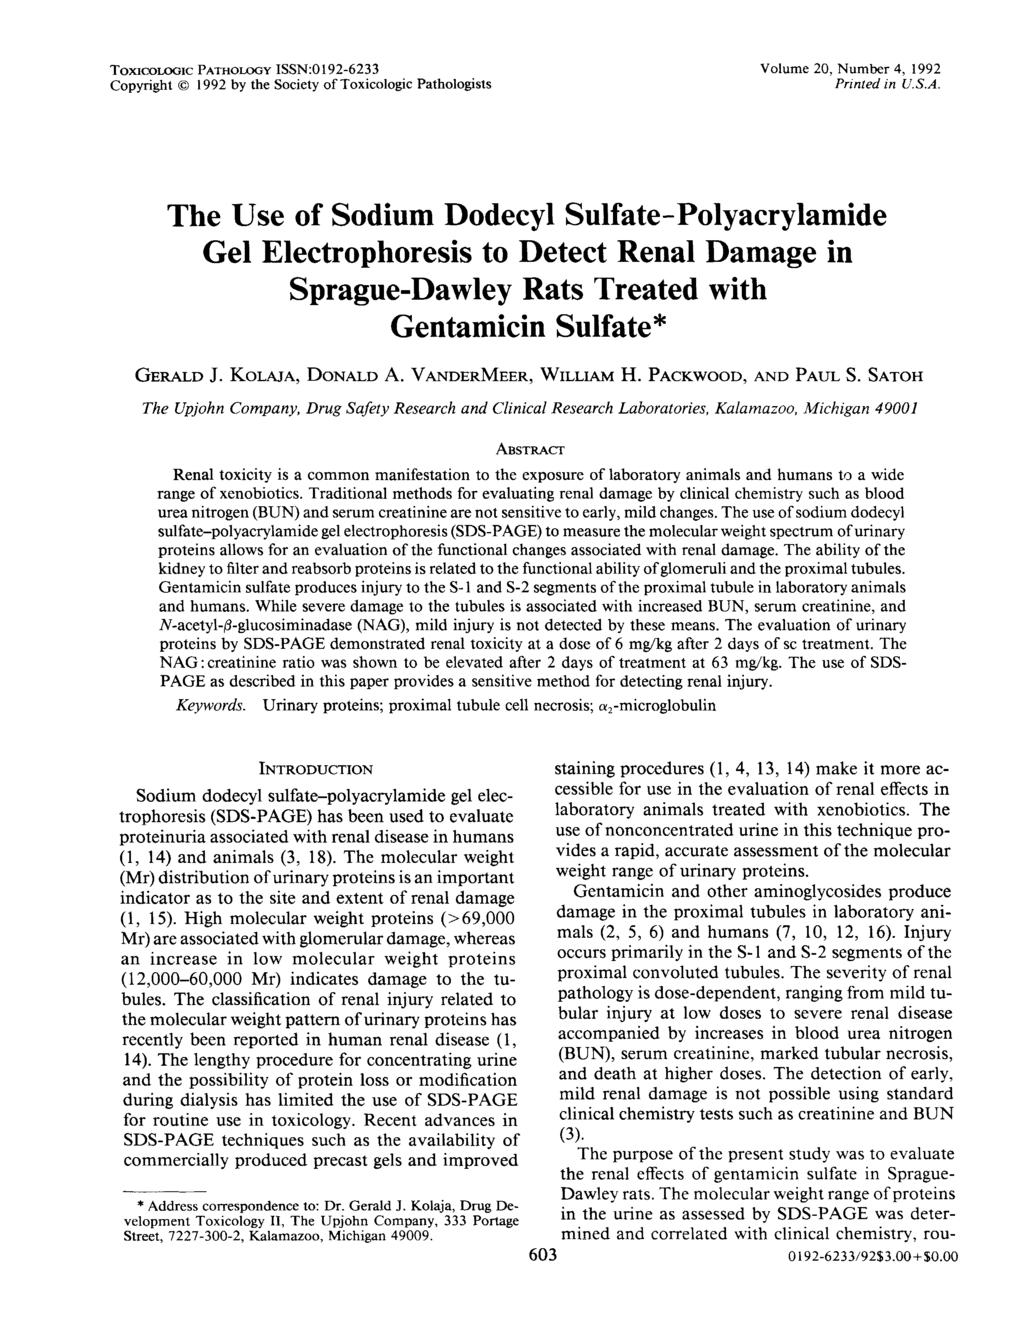 The Use of Sodium Dodecyl Sulfate-Polyacrylamide Gel Electrophoresis to Detect Renal Damage in Sprague-Dawley Rats Treated with Gentamicin Sulfate* GERALD J. KOLAJA, DONALD A. VANDERMEER, WILLIAM H.